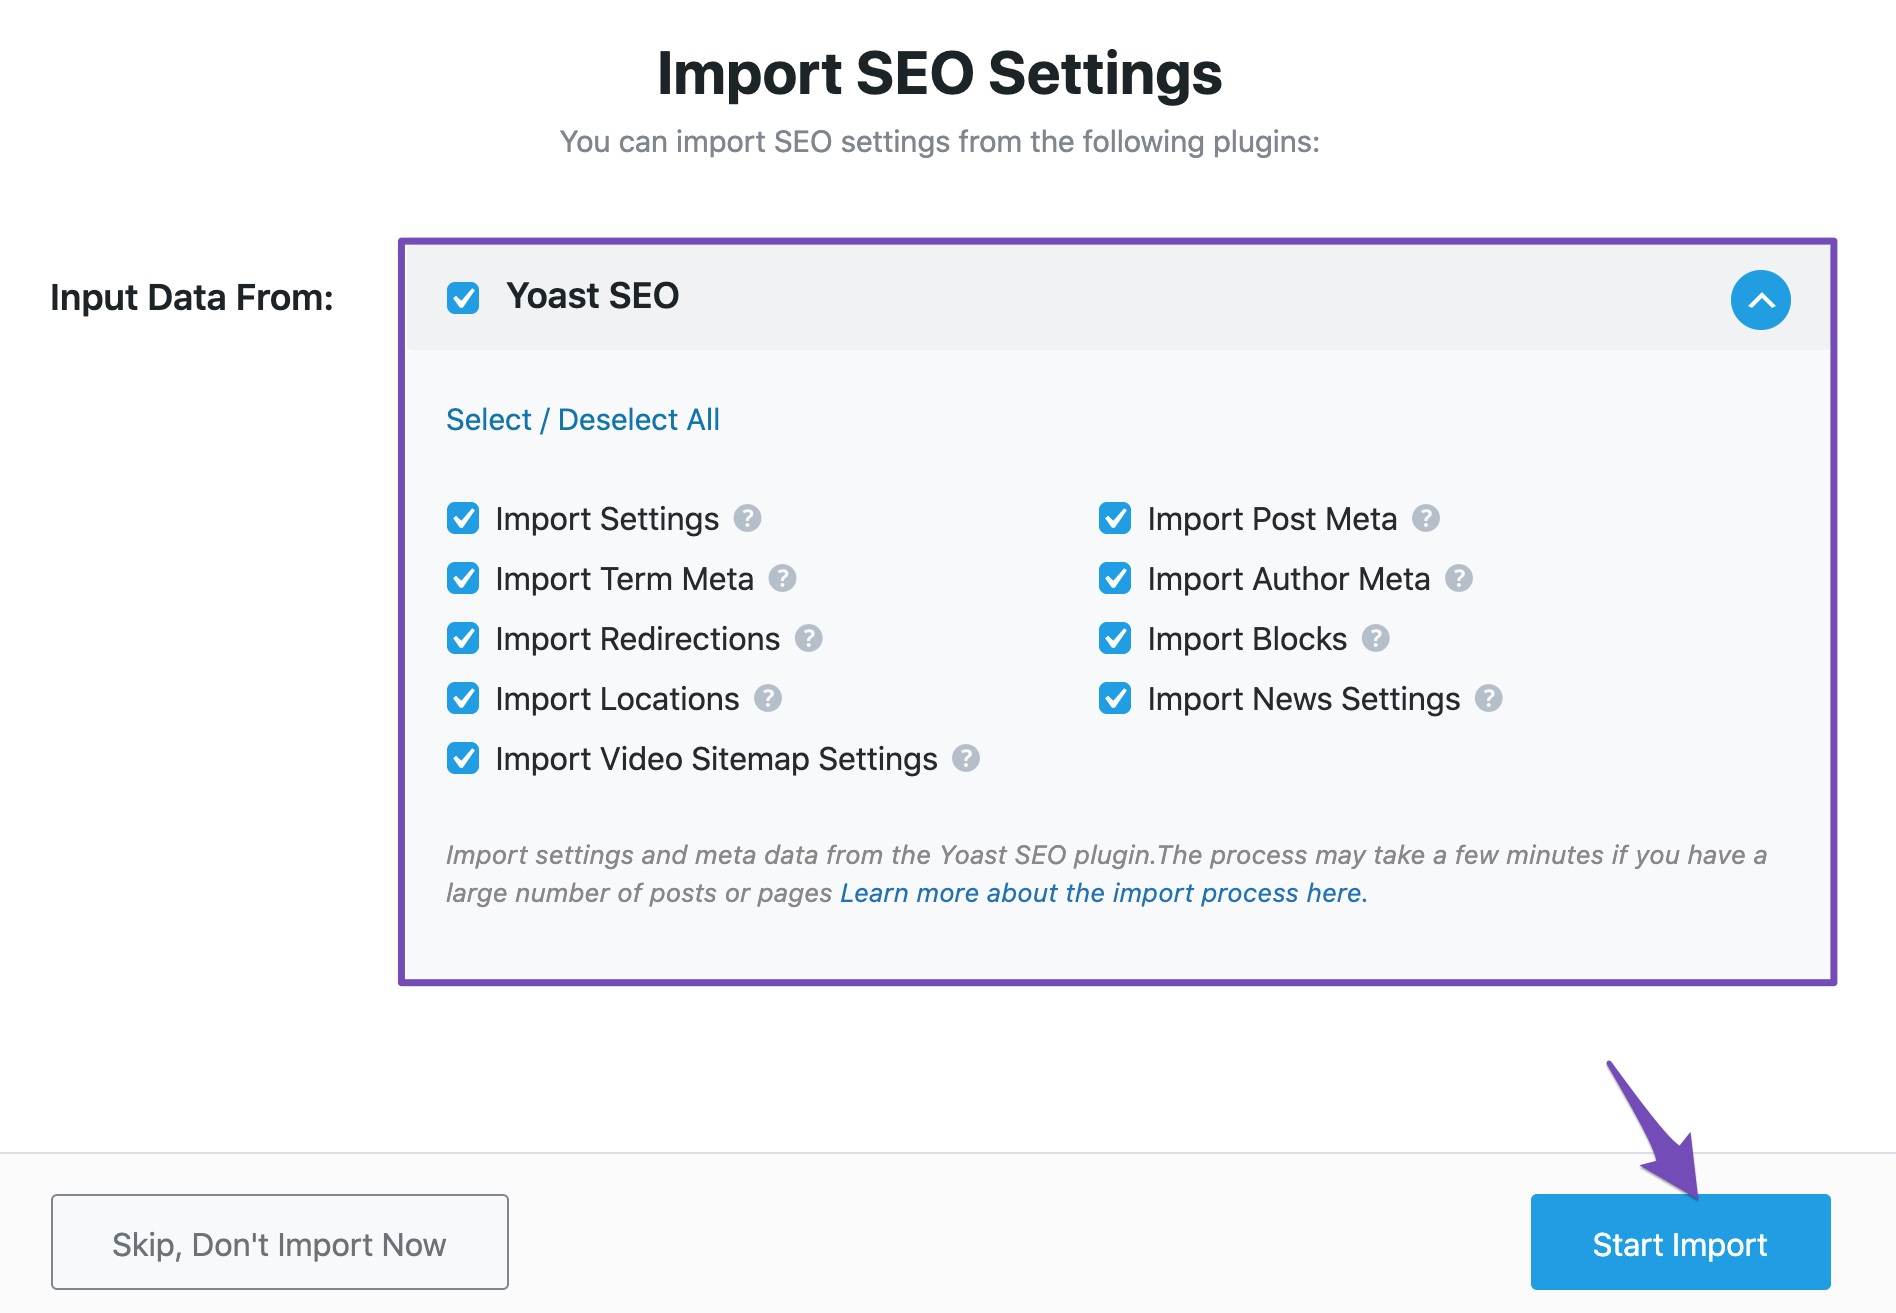 Input data available from Yoast SEO plugin to import to Rank Math